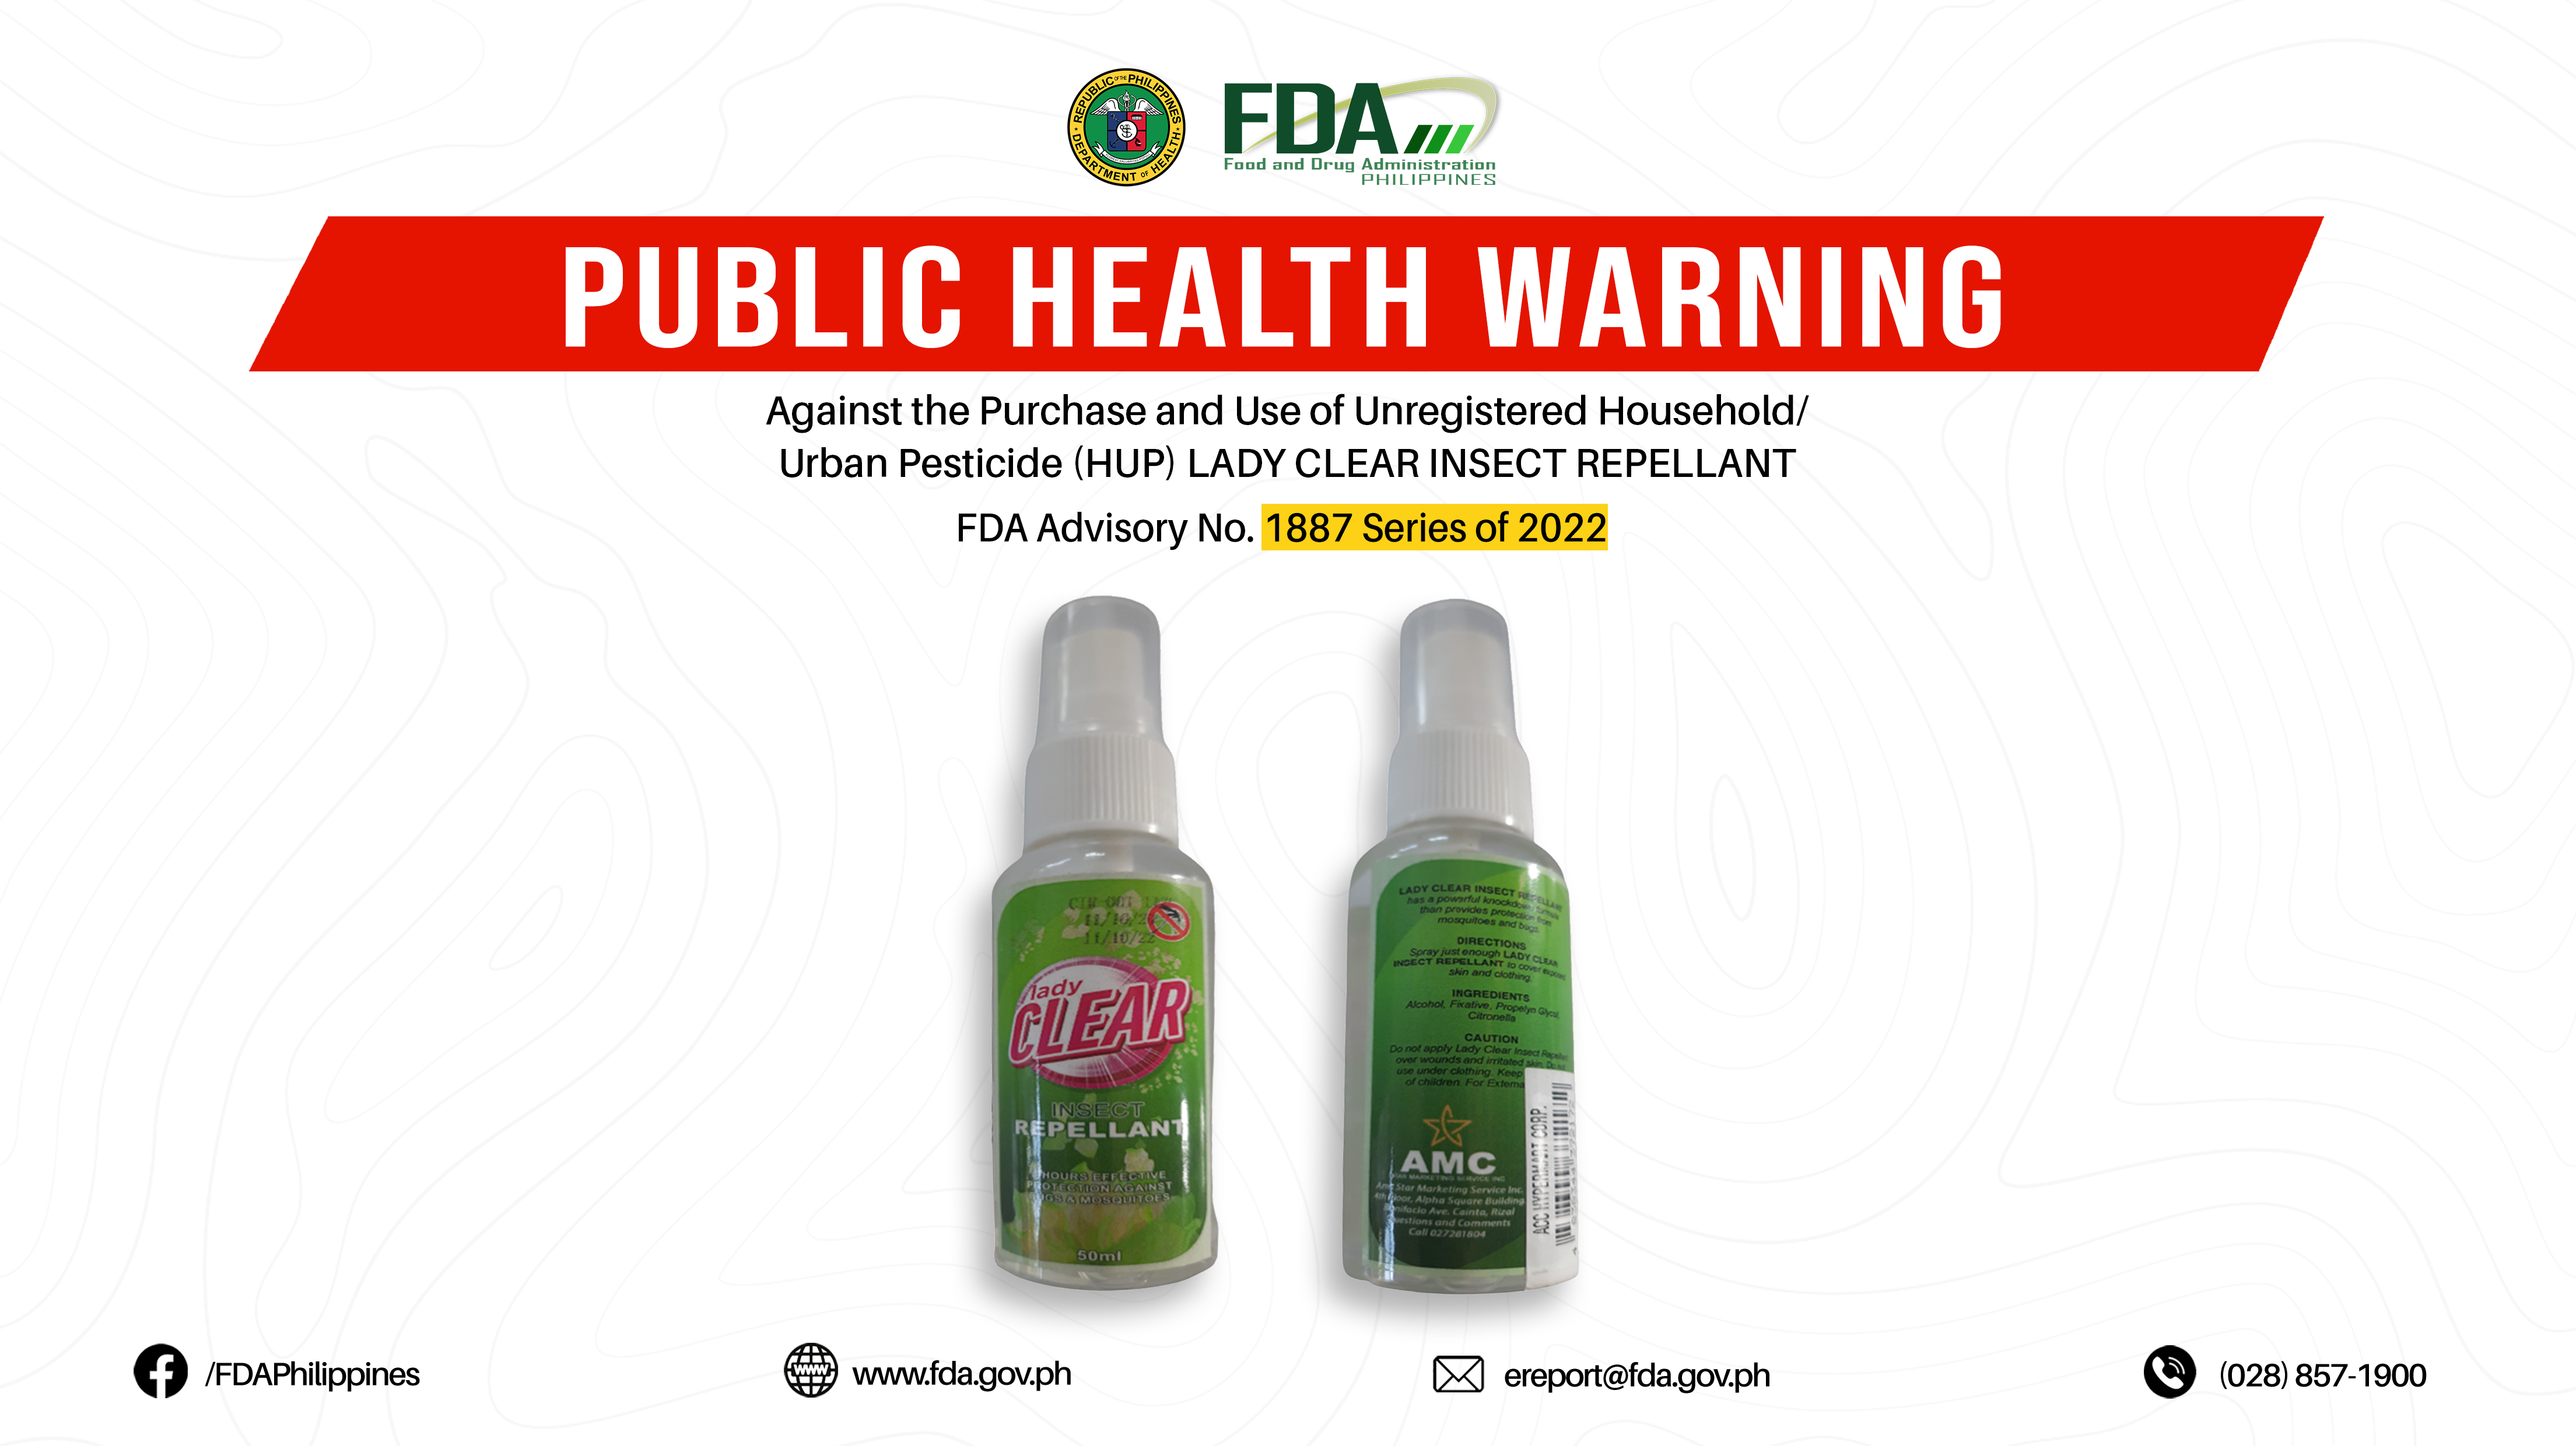 FDA Advisory No.2022-1887 || Public Health Warning Against the Purchase and Use of Unregistered Household/Urban Pesticide (HUP) LADY CLEAR INSECT REPELLANT